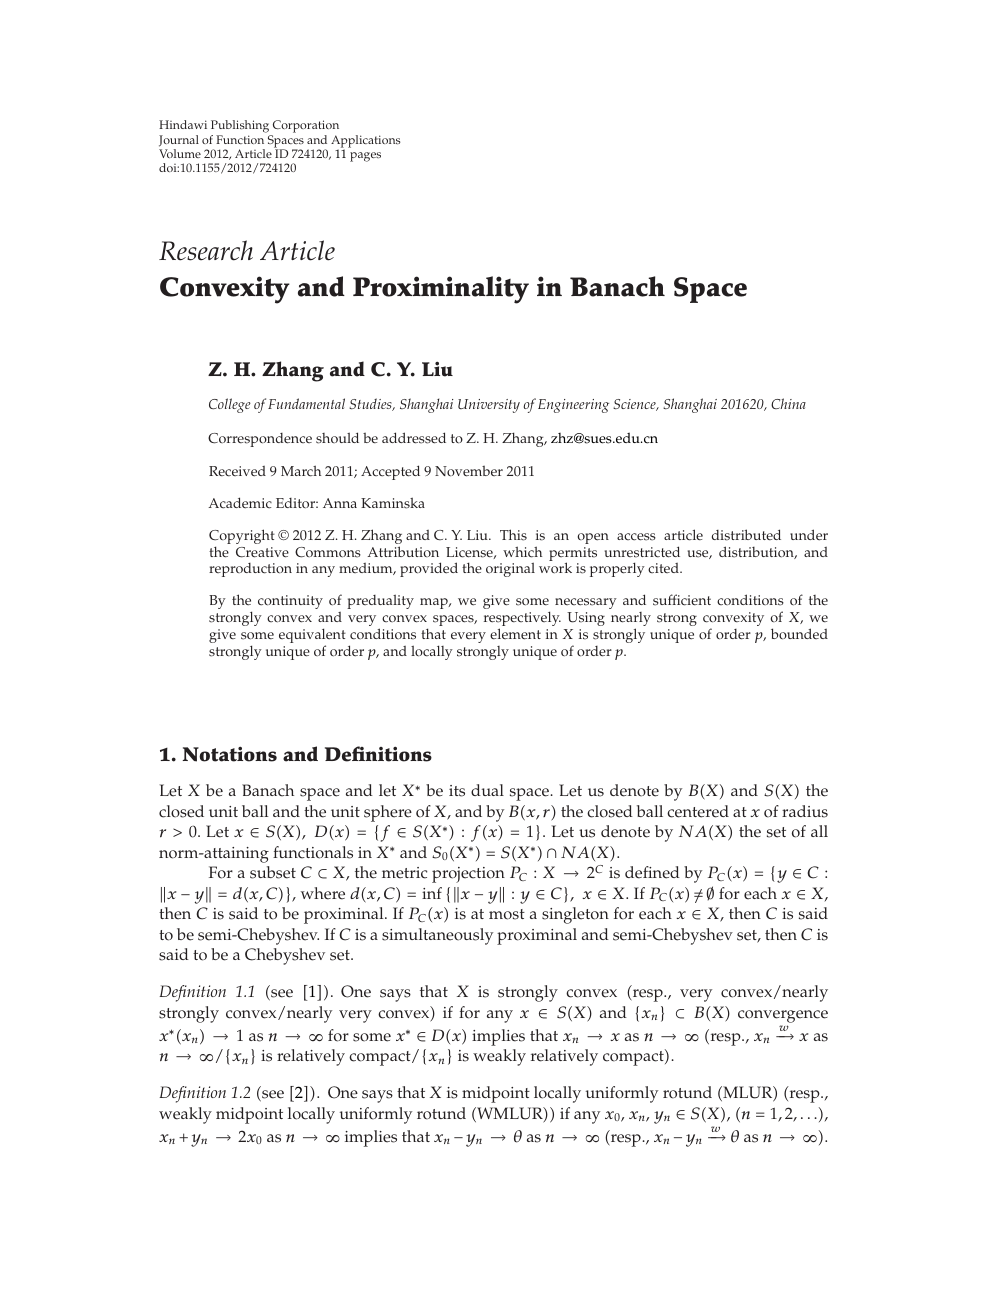 Convexity And Proximinality In Banach Space Topic Of Research Paper In Mathematics Download Scholarly Article Pdf And Read For Free On Cyberleninka Open Science Hub